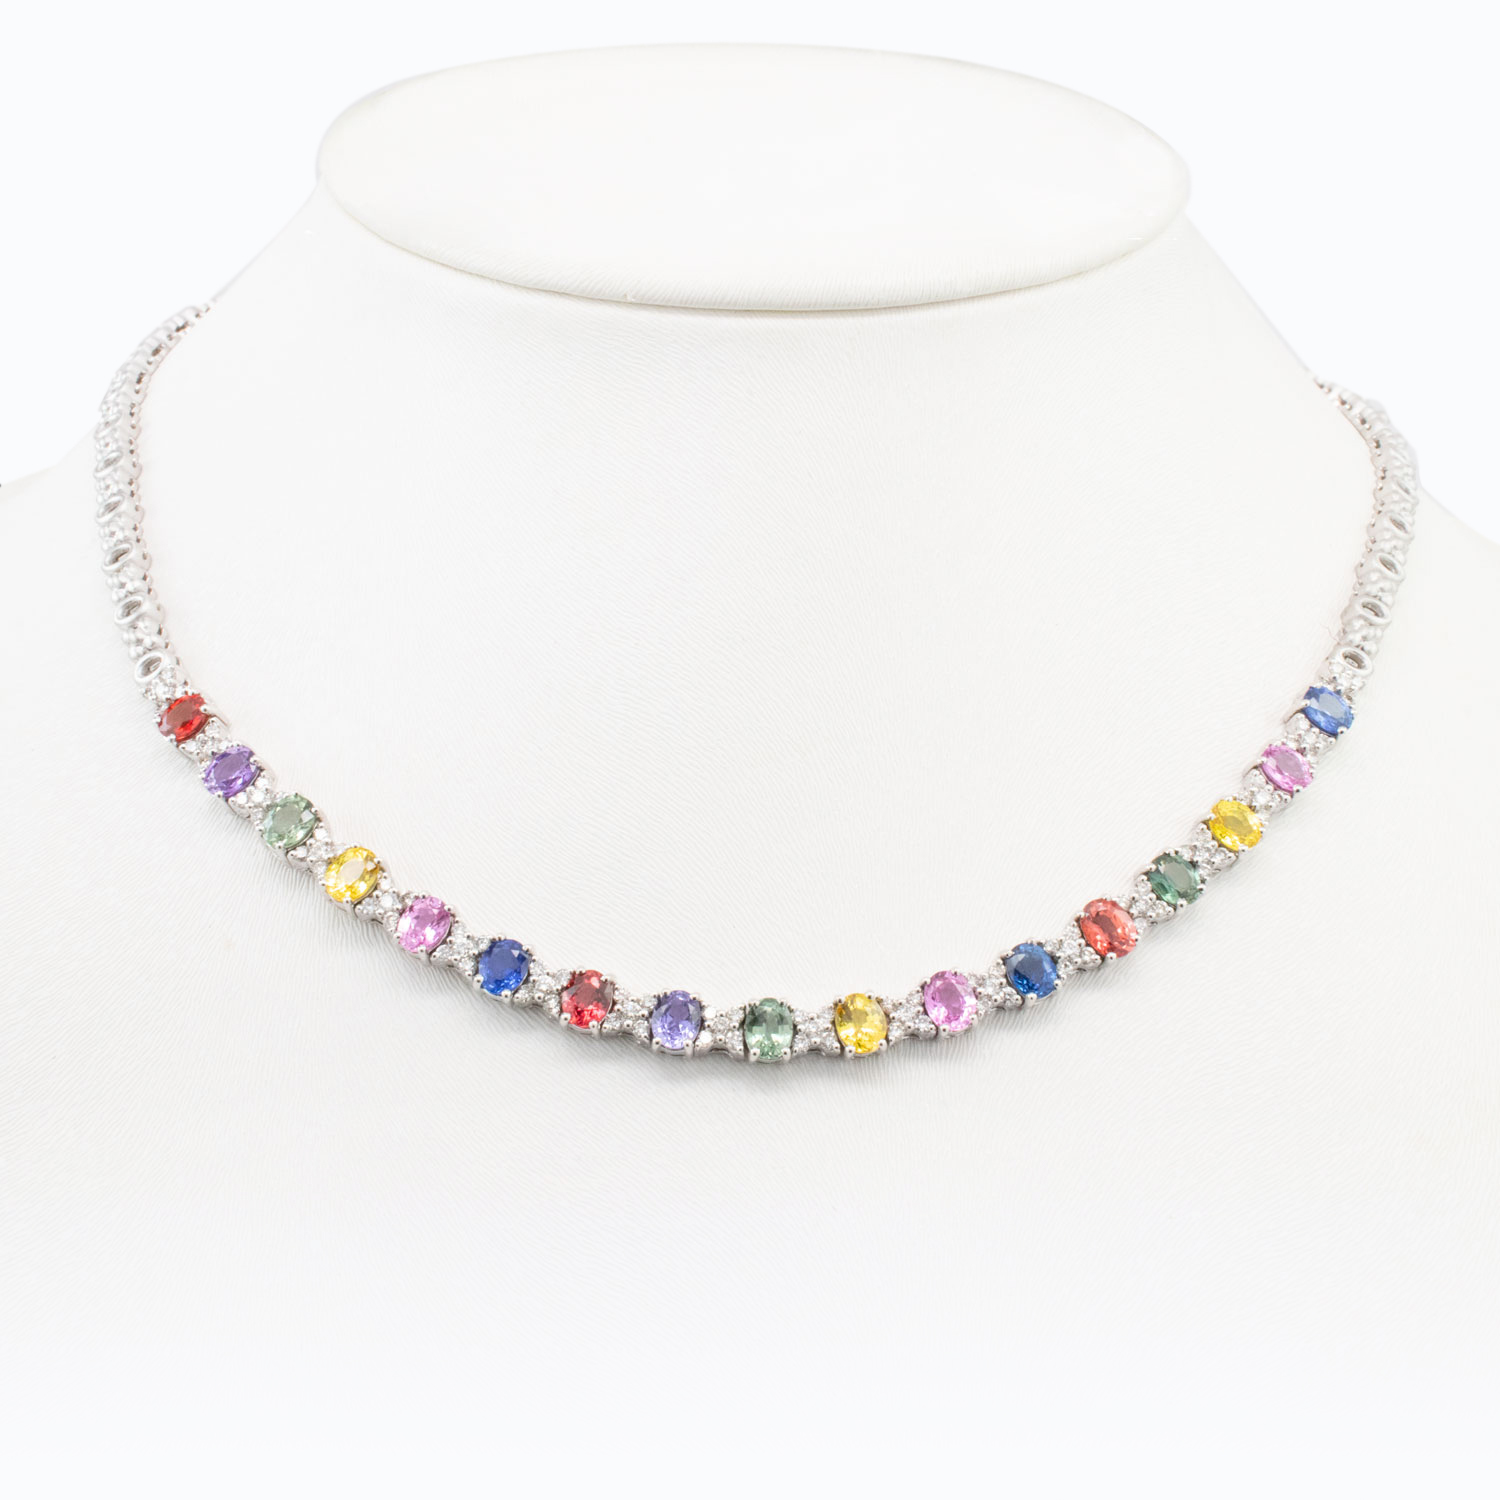 Hugs and Kisses Multicolored Sapphire and Diamond Necklace, 18k White Gold